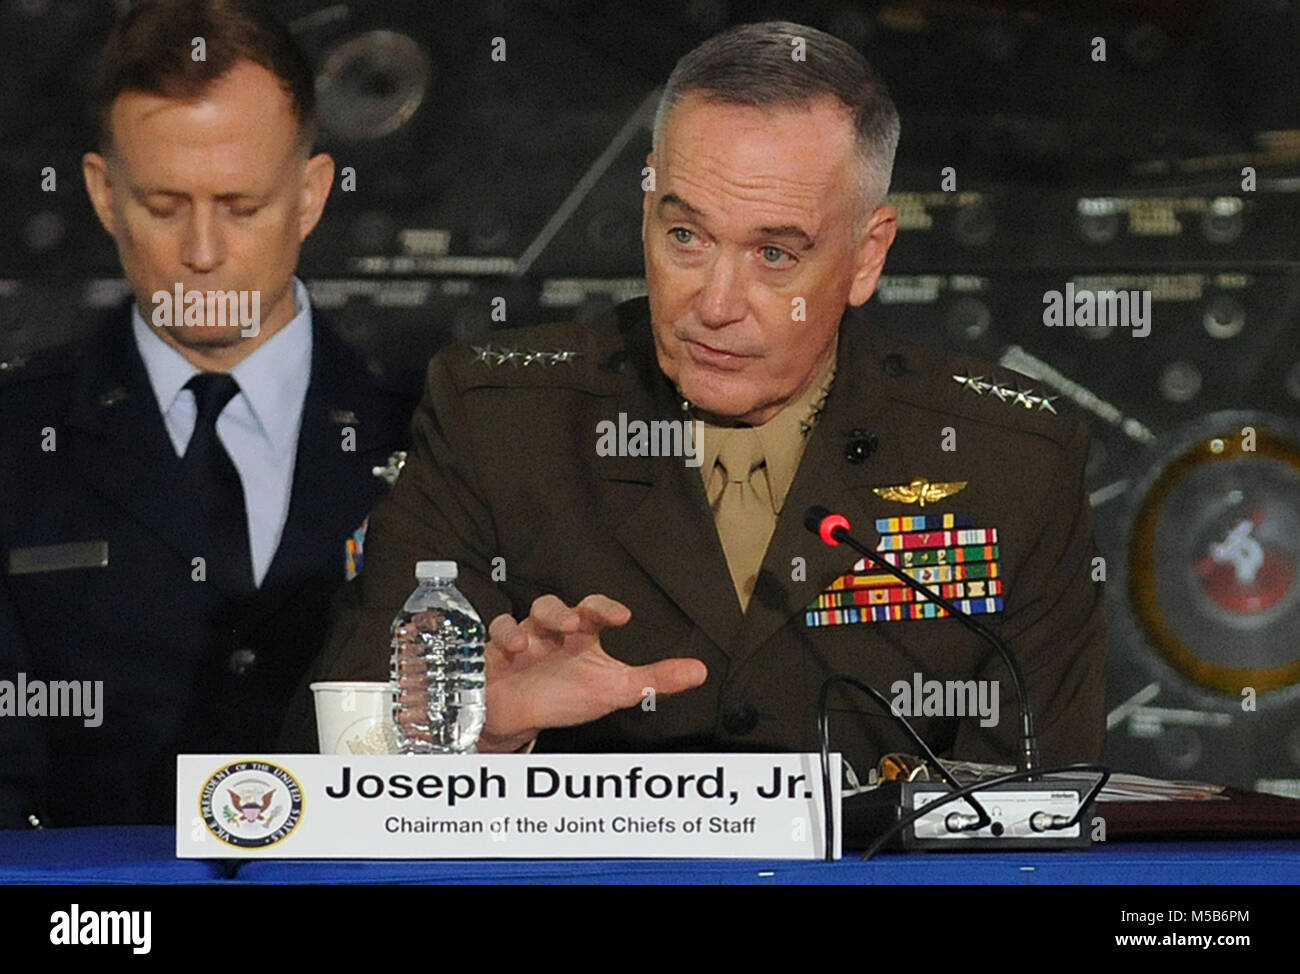 Kennedy Space Center, USA. February 20, 2018 - Kennedy Space Center, Florida, United States - Gen. Joseph Dunford, Jr., Chairman of the Joint Chiefs of Staff, asks a question during the second meeting of the National Space Council. The Trump administration re-established the council in June, 2017. Credit: Paul Hennessy/Alamy Live News Stock Photo